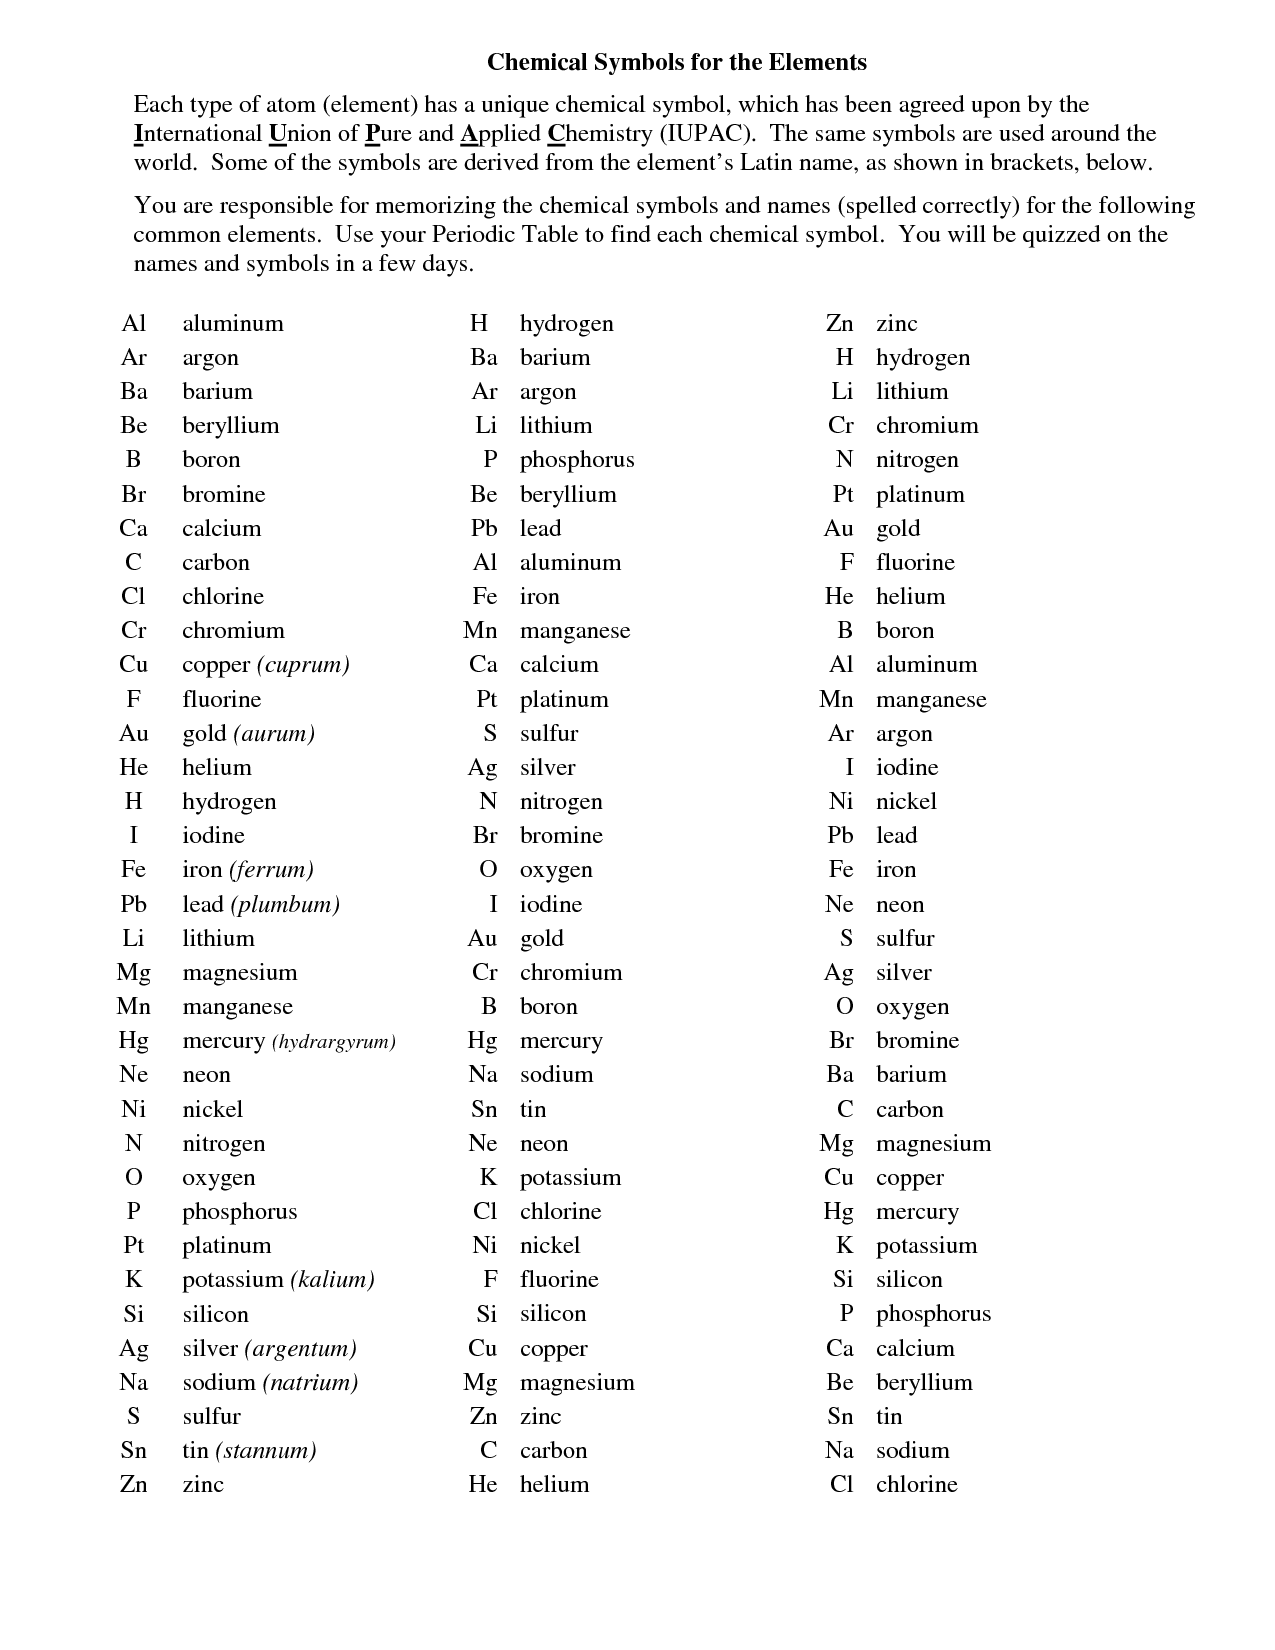 Chemical Element Names and Symbols Image